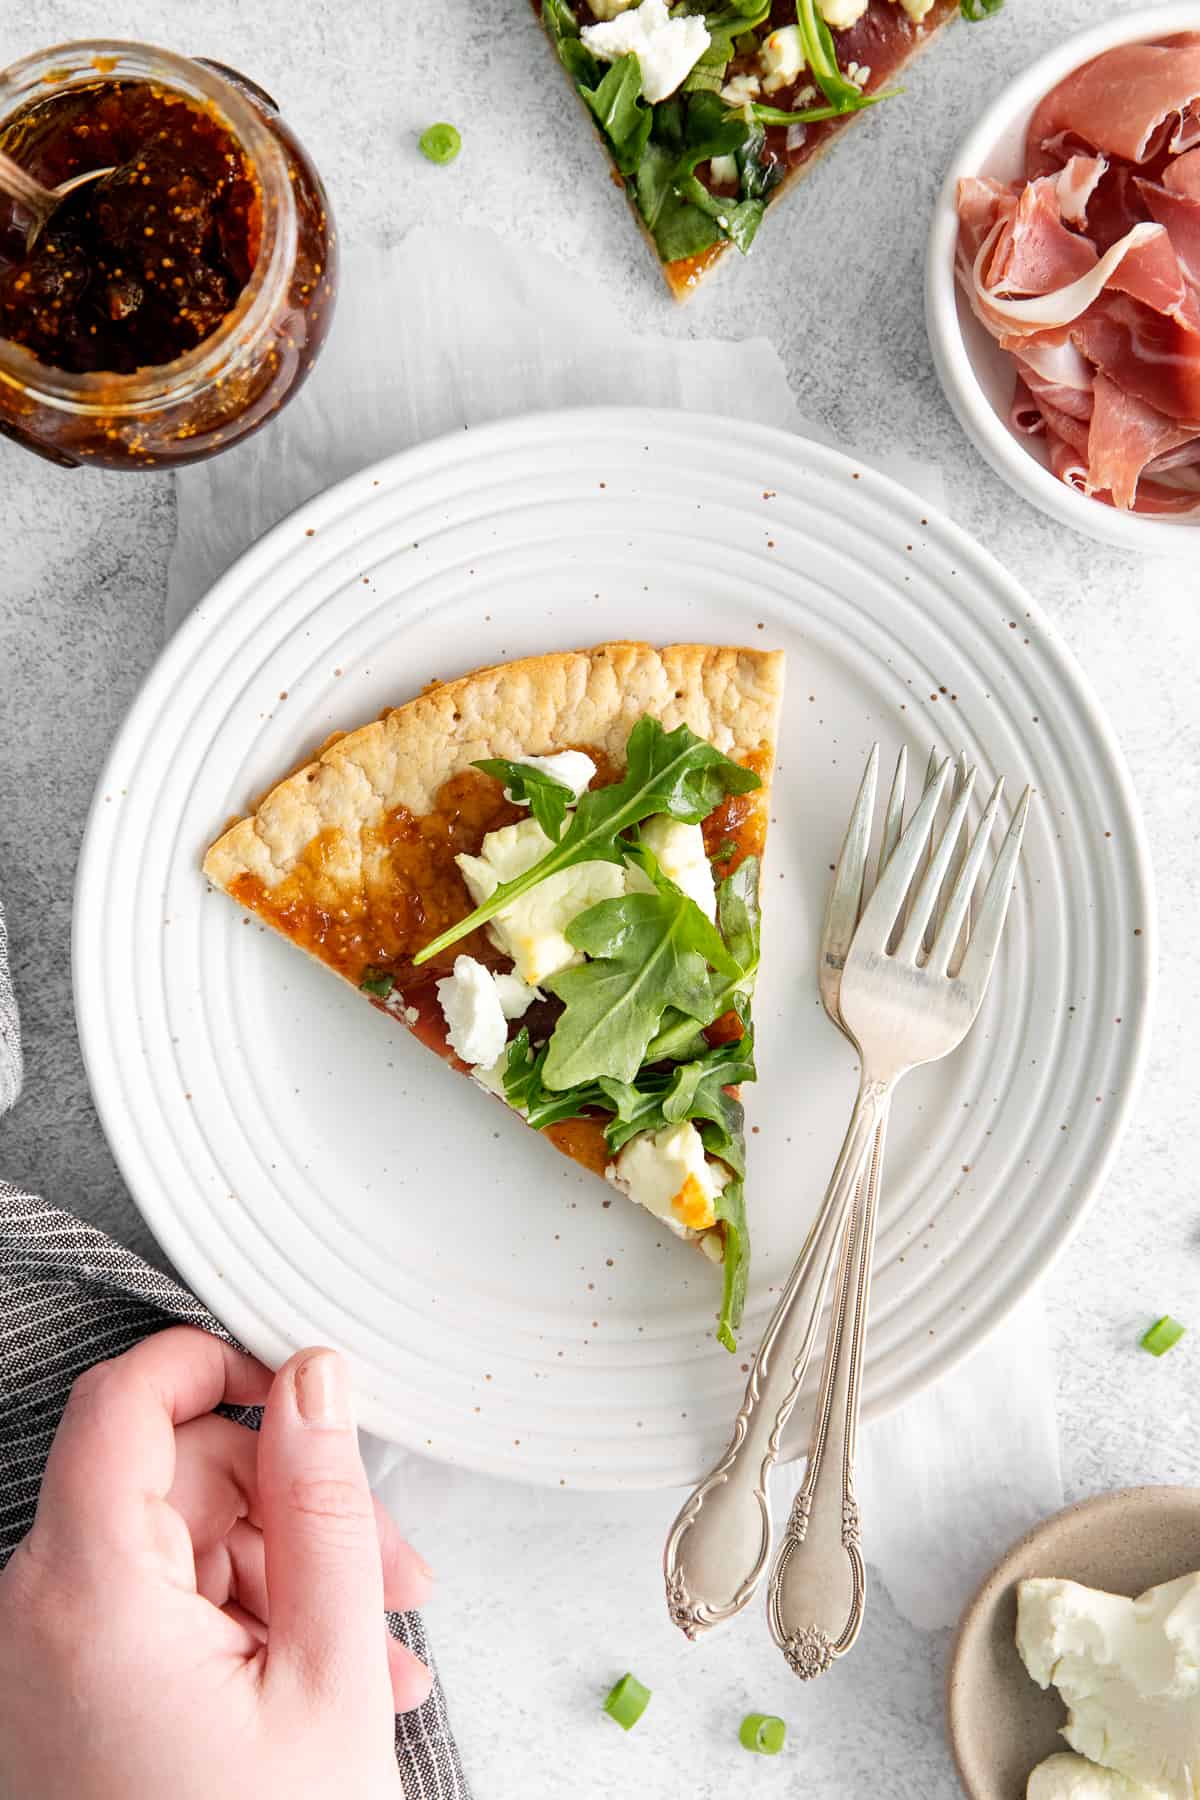 A slice of fig and goat cheese flatbread on a plate with forks.